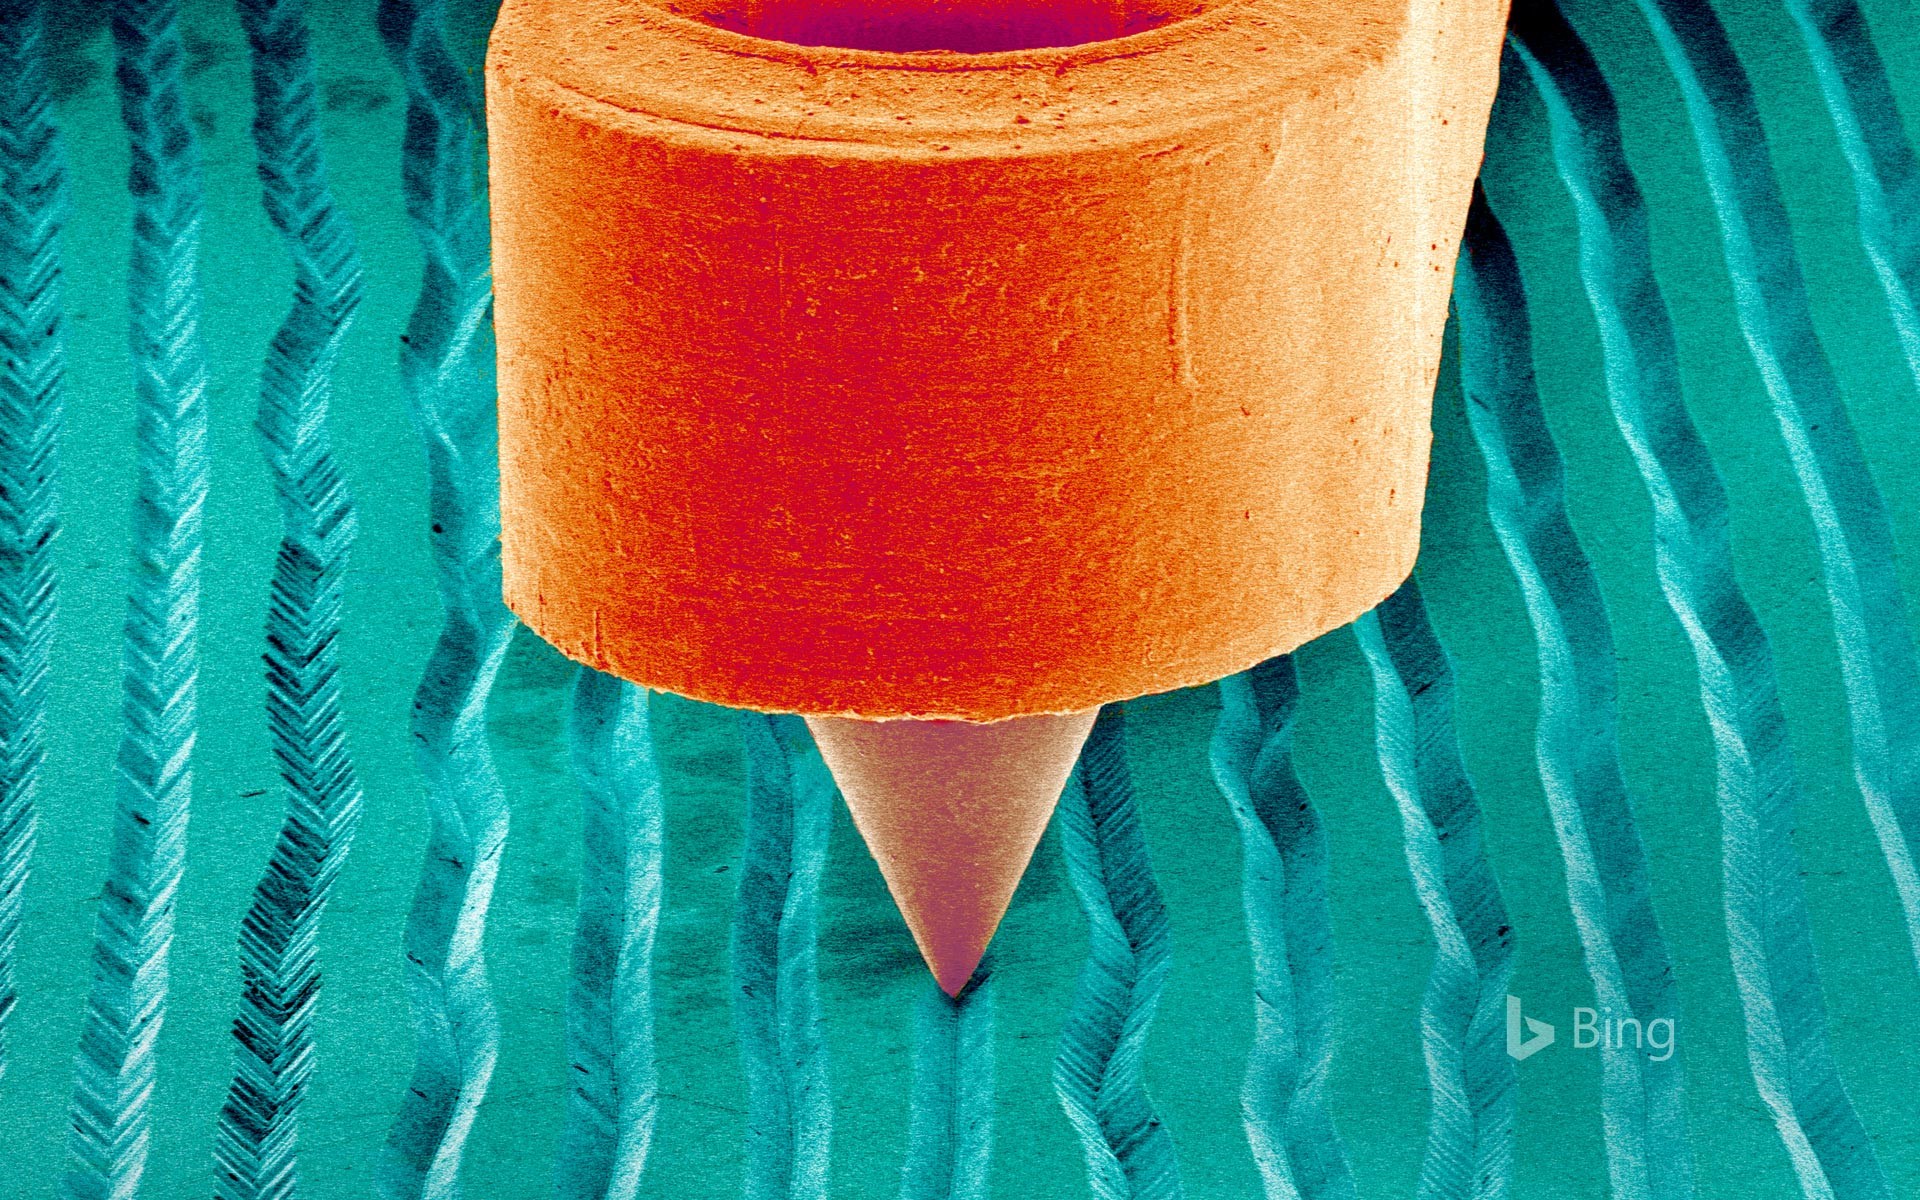 A scanning electron micrograph of a needle on a record